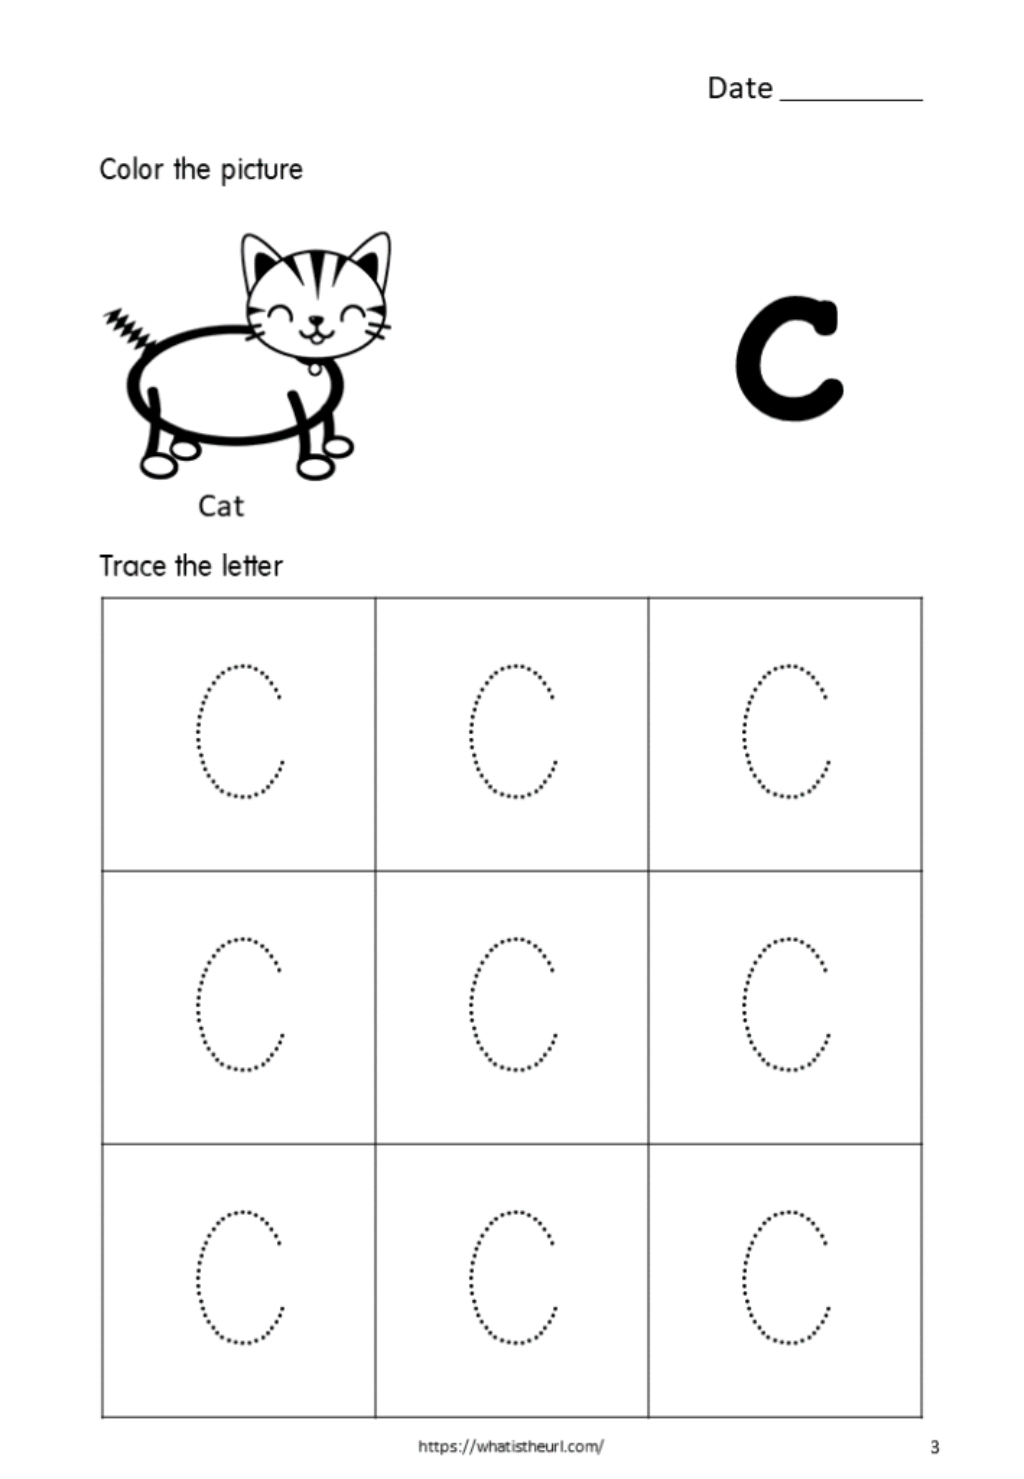 Tracing-Alphabet-Capital-Letter-C-For-Kids - Your Home Teacher